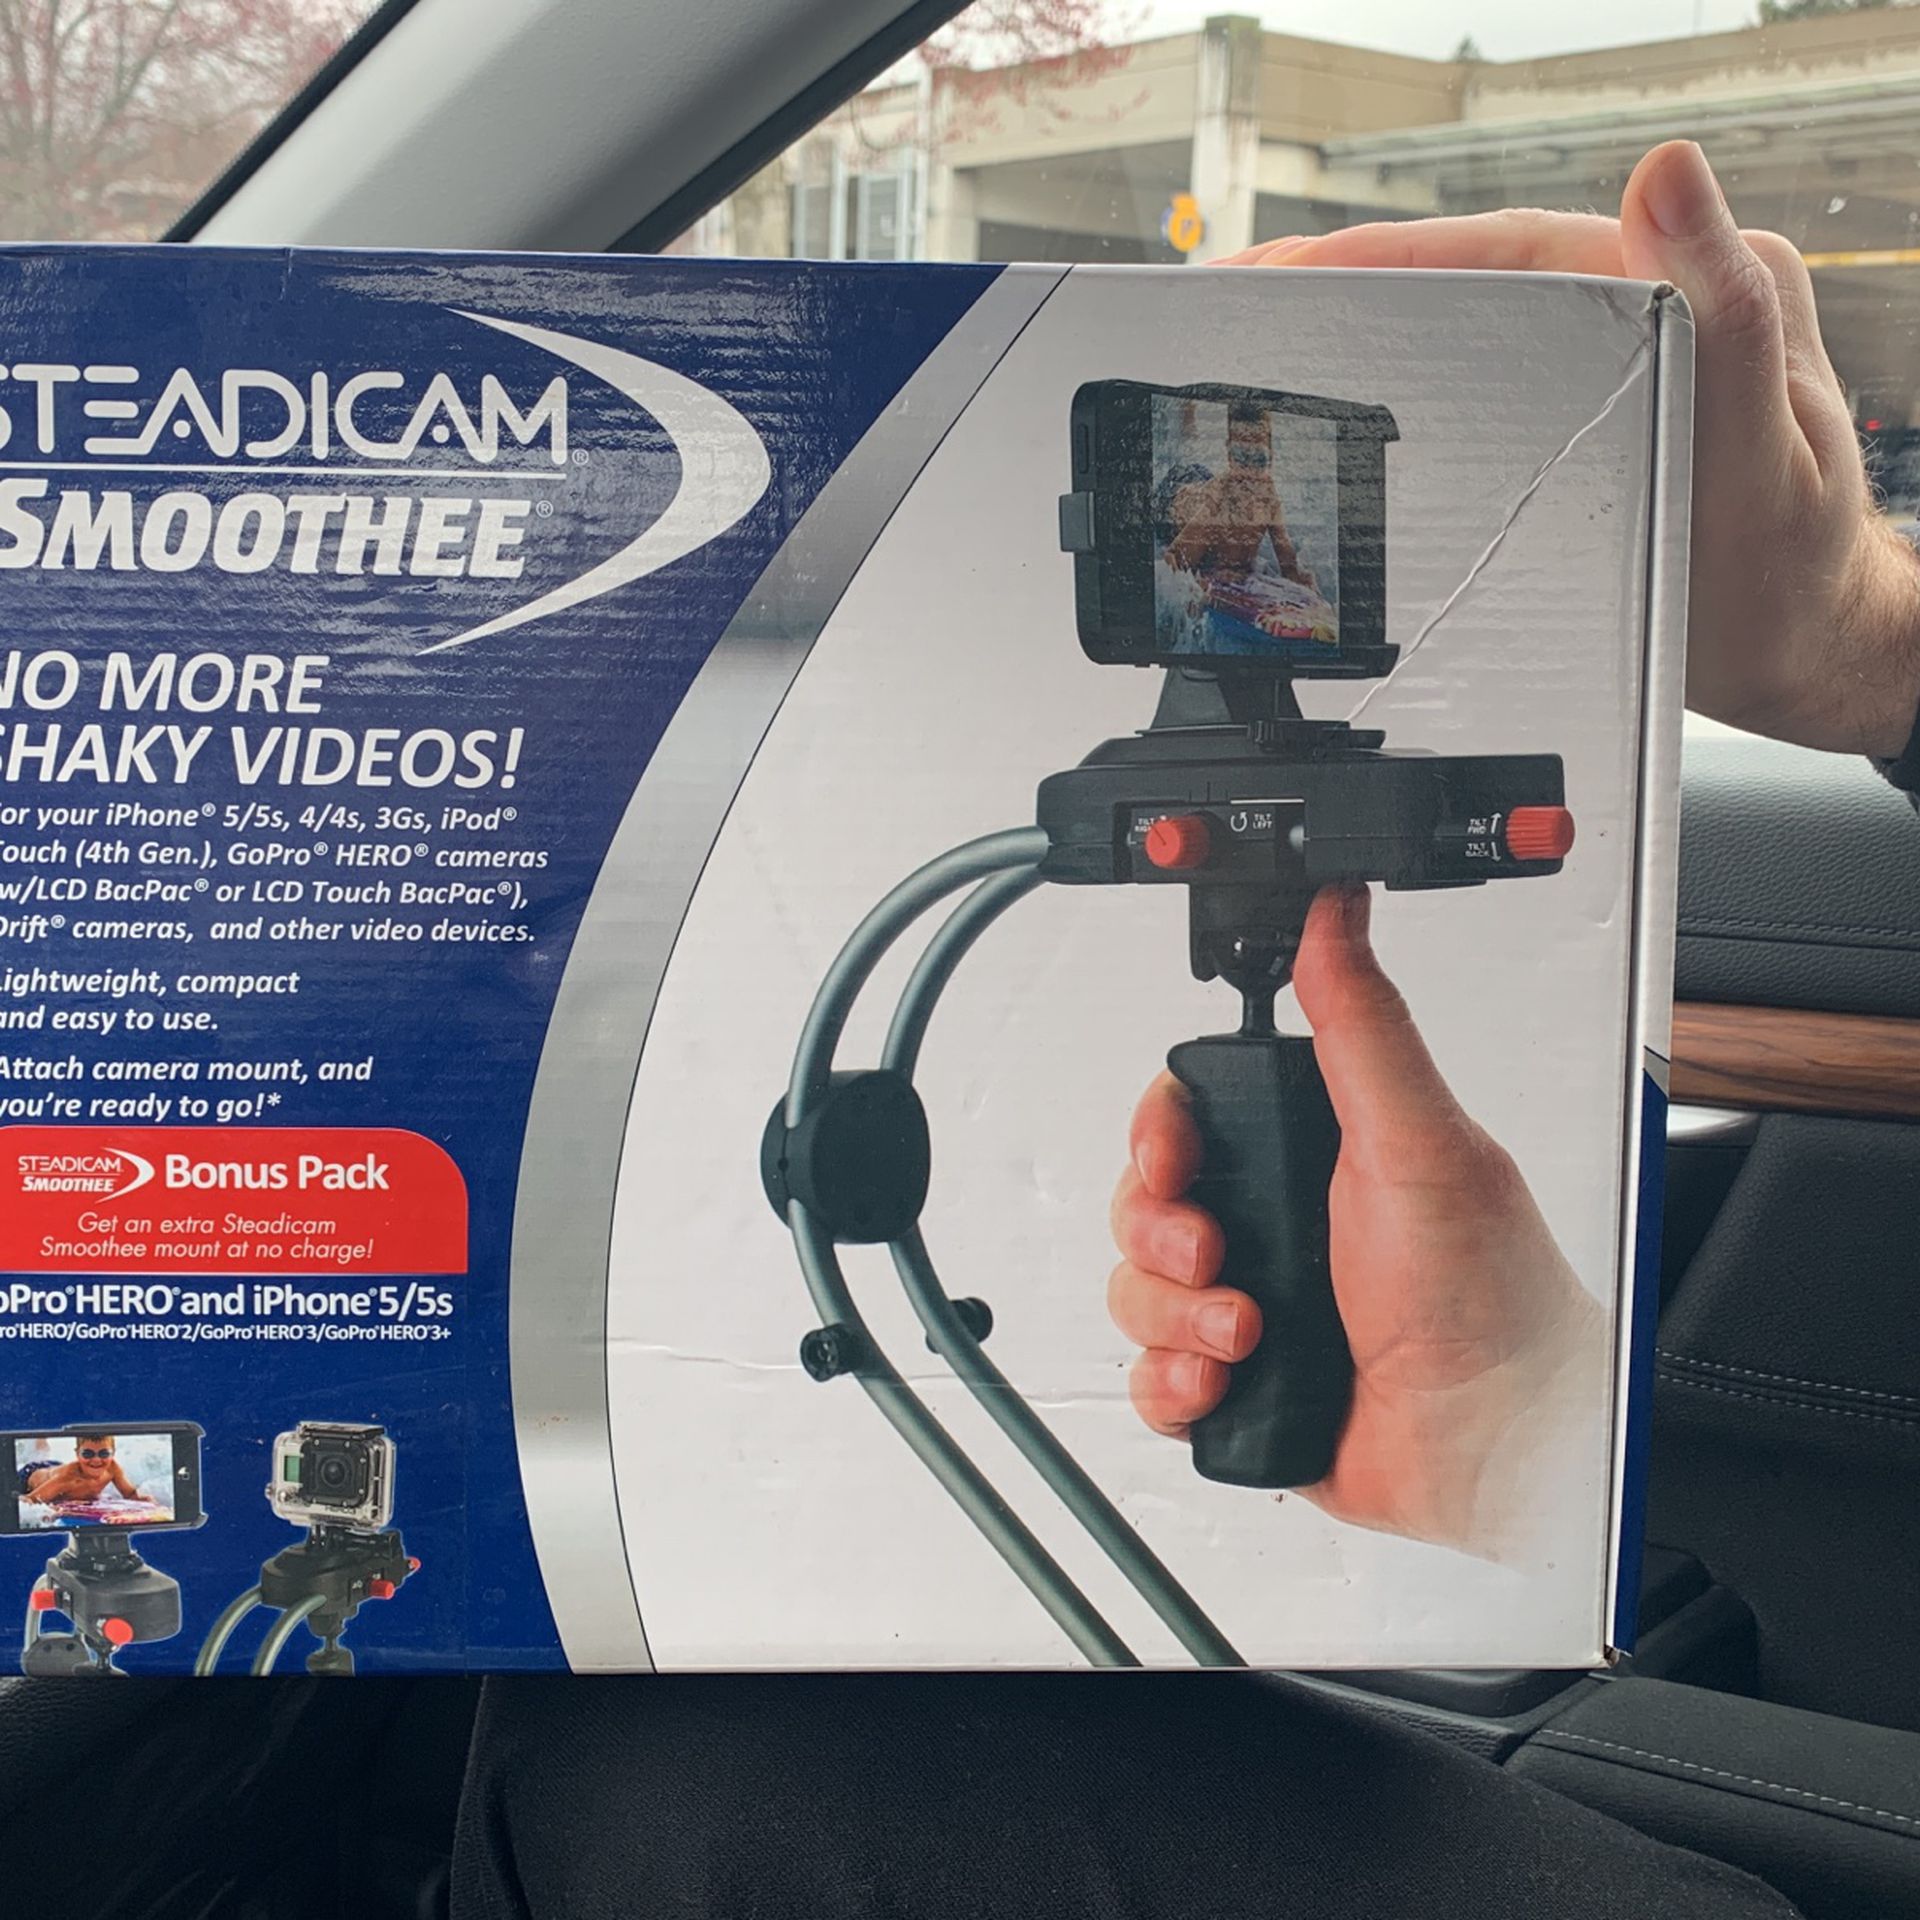 Steadicam Smoothee For iPhones And GoPro 